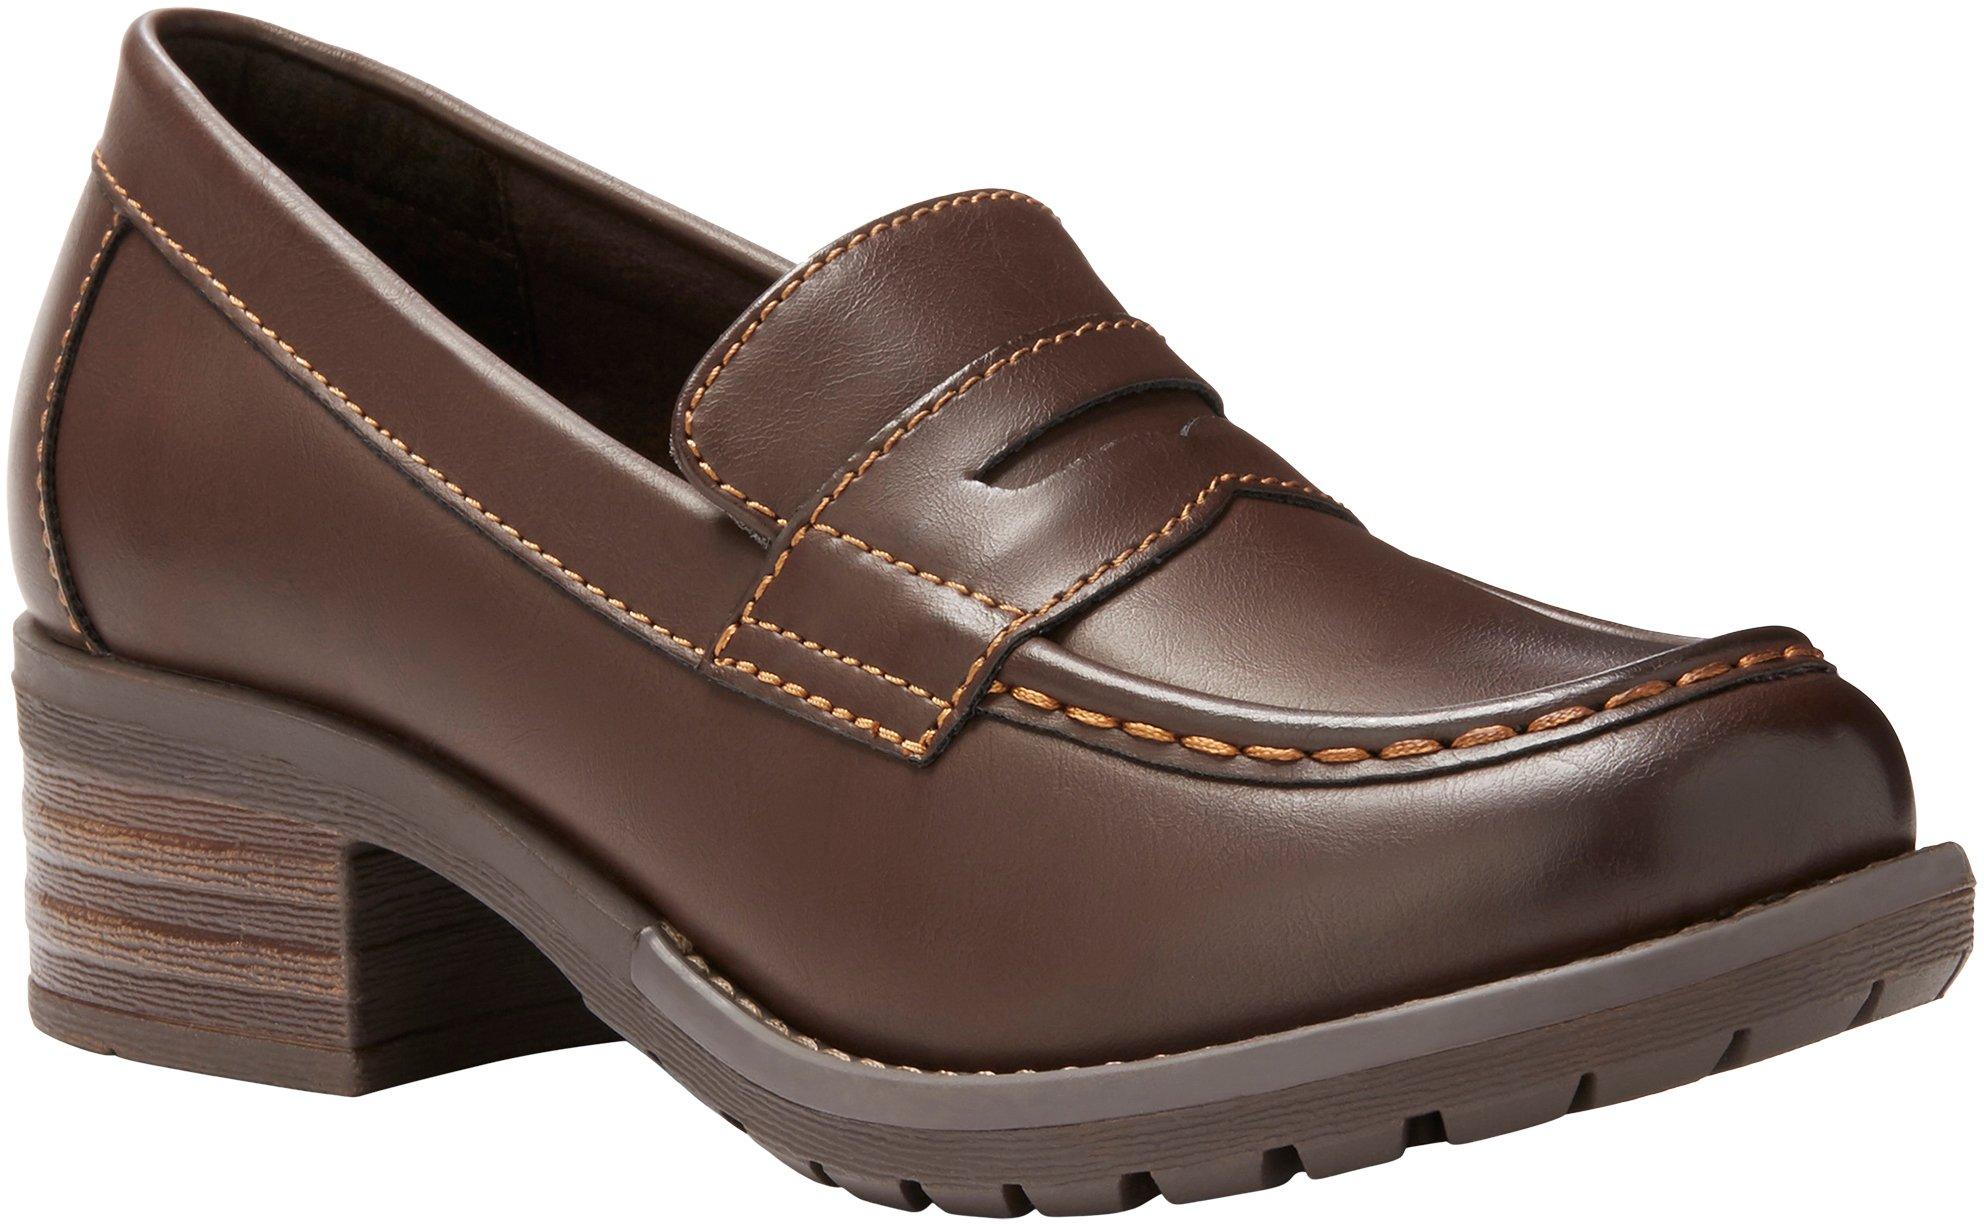 Eastland Womens Holly Loafers